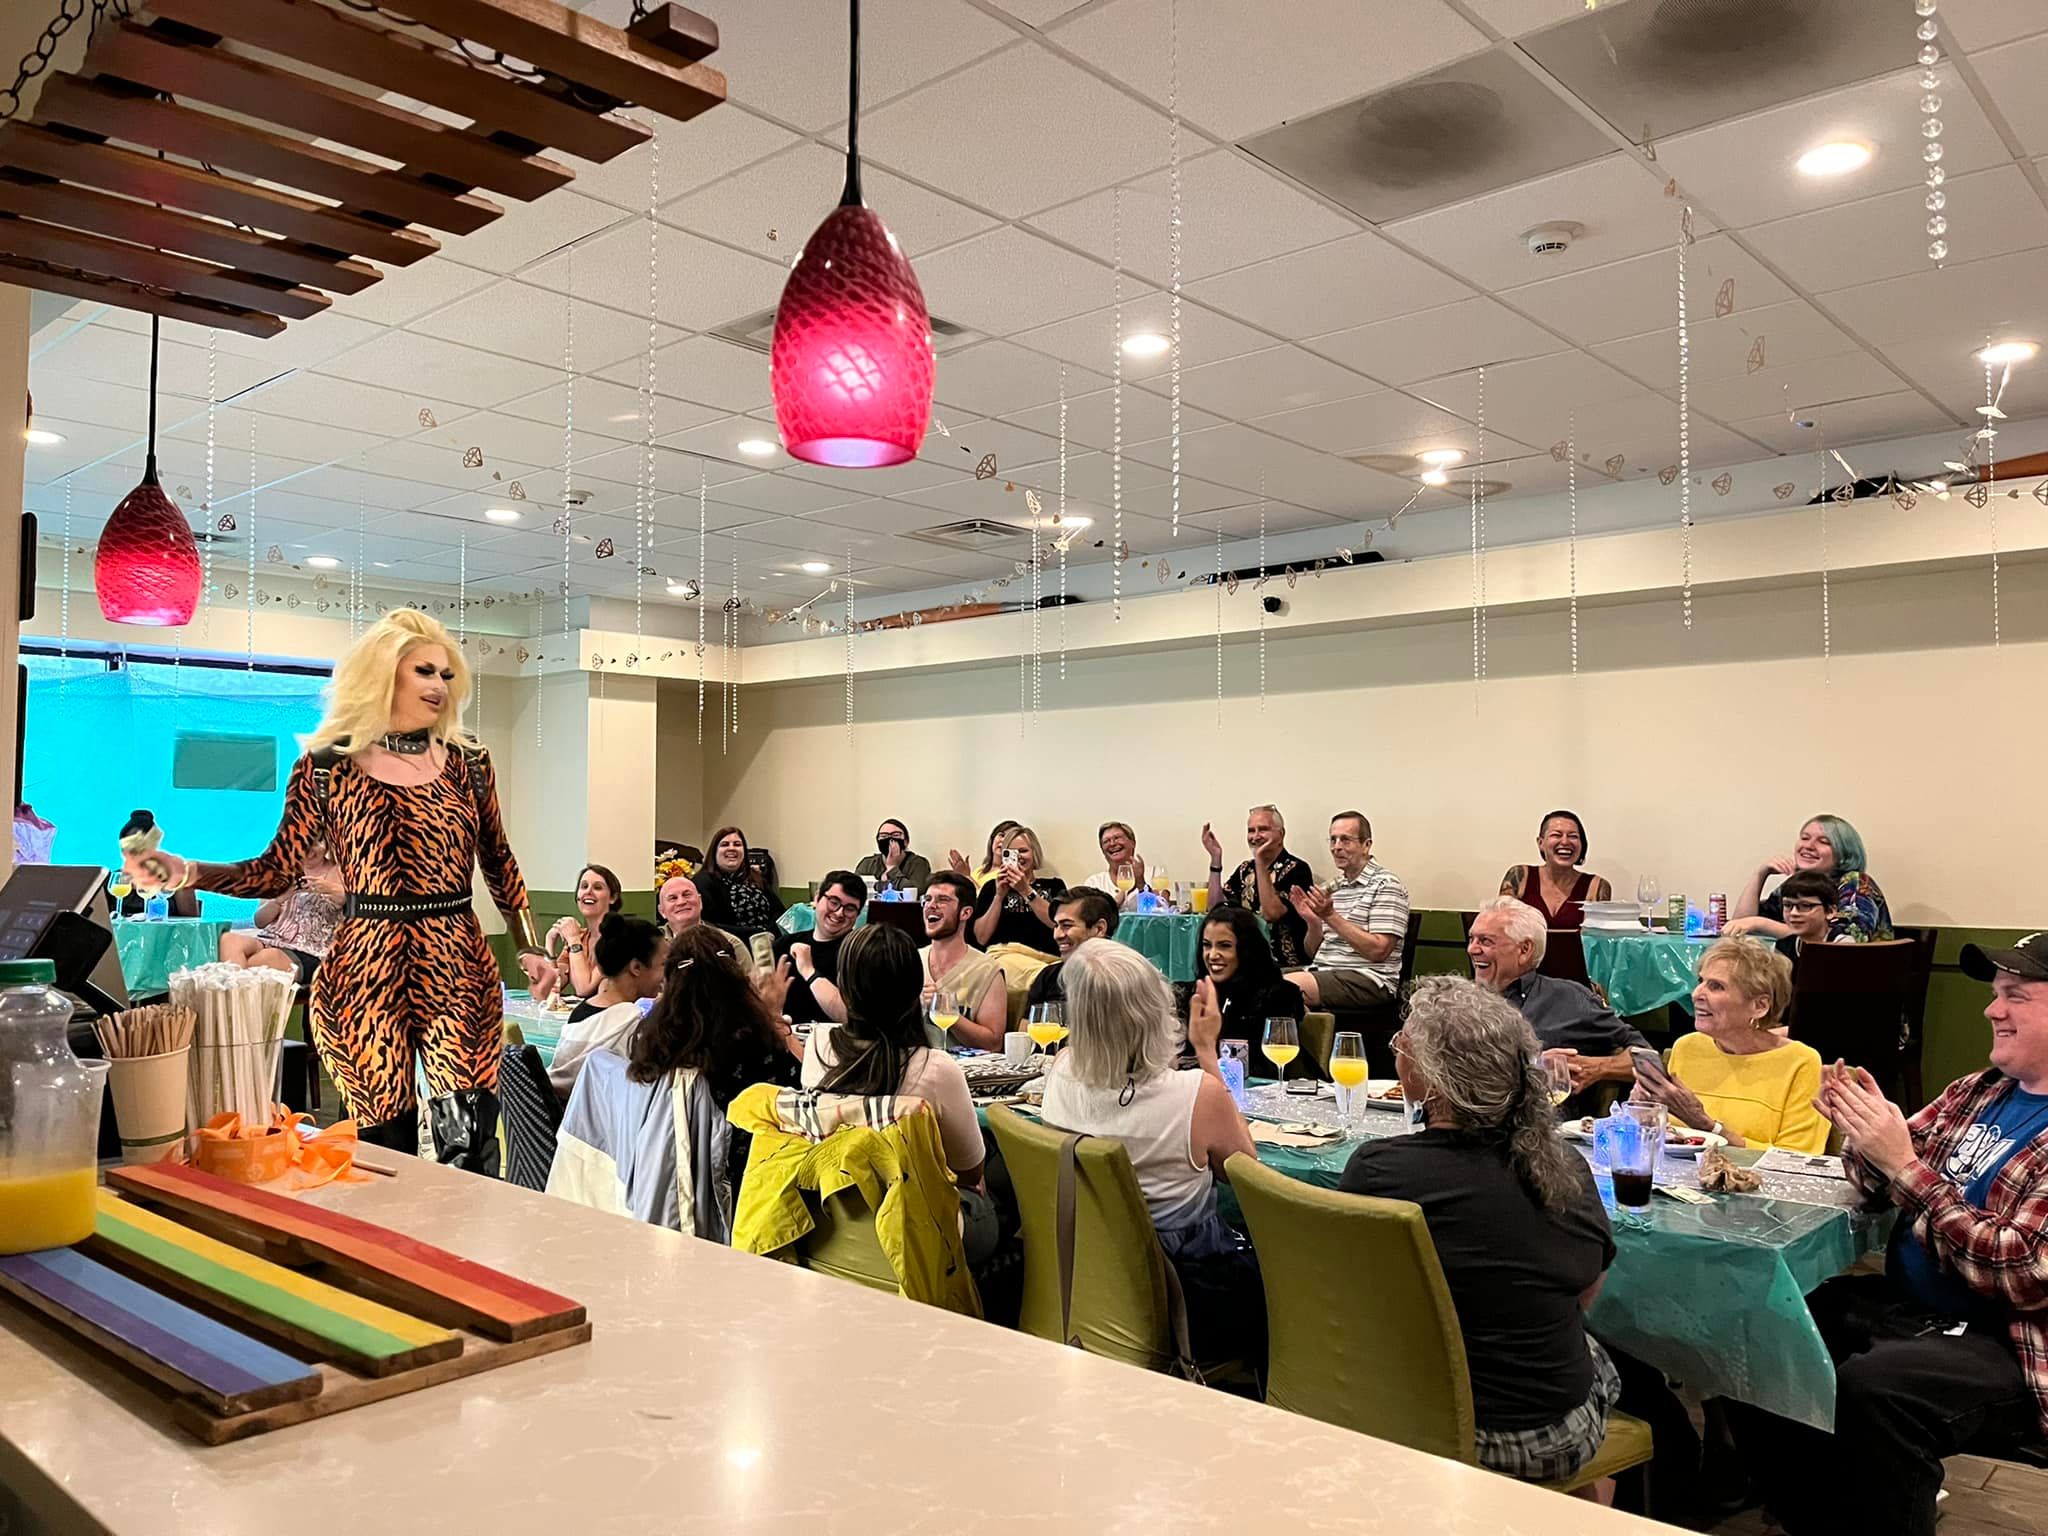 UpRising Bakery & Cafe was finally able to host its drag show performance in a sold out event held on Aug. 7